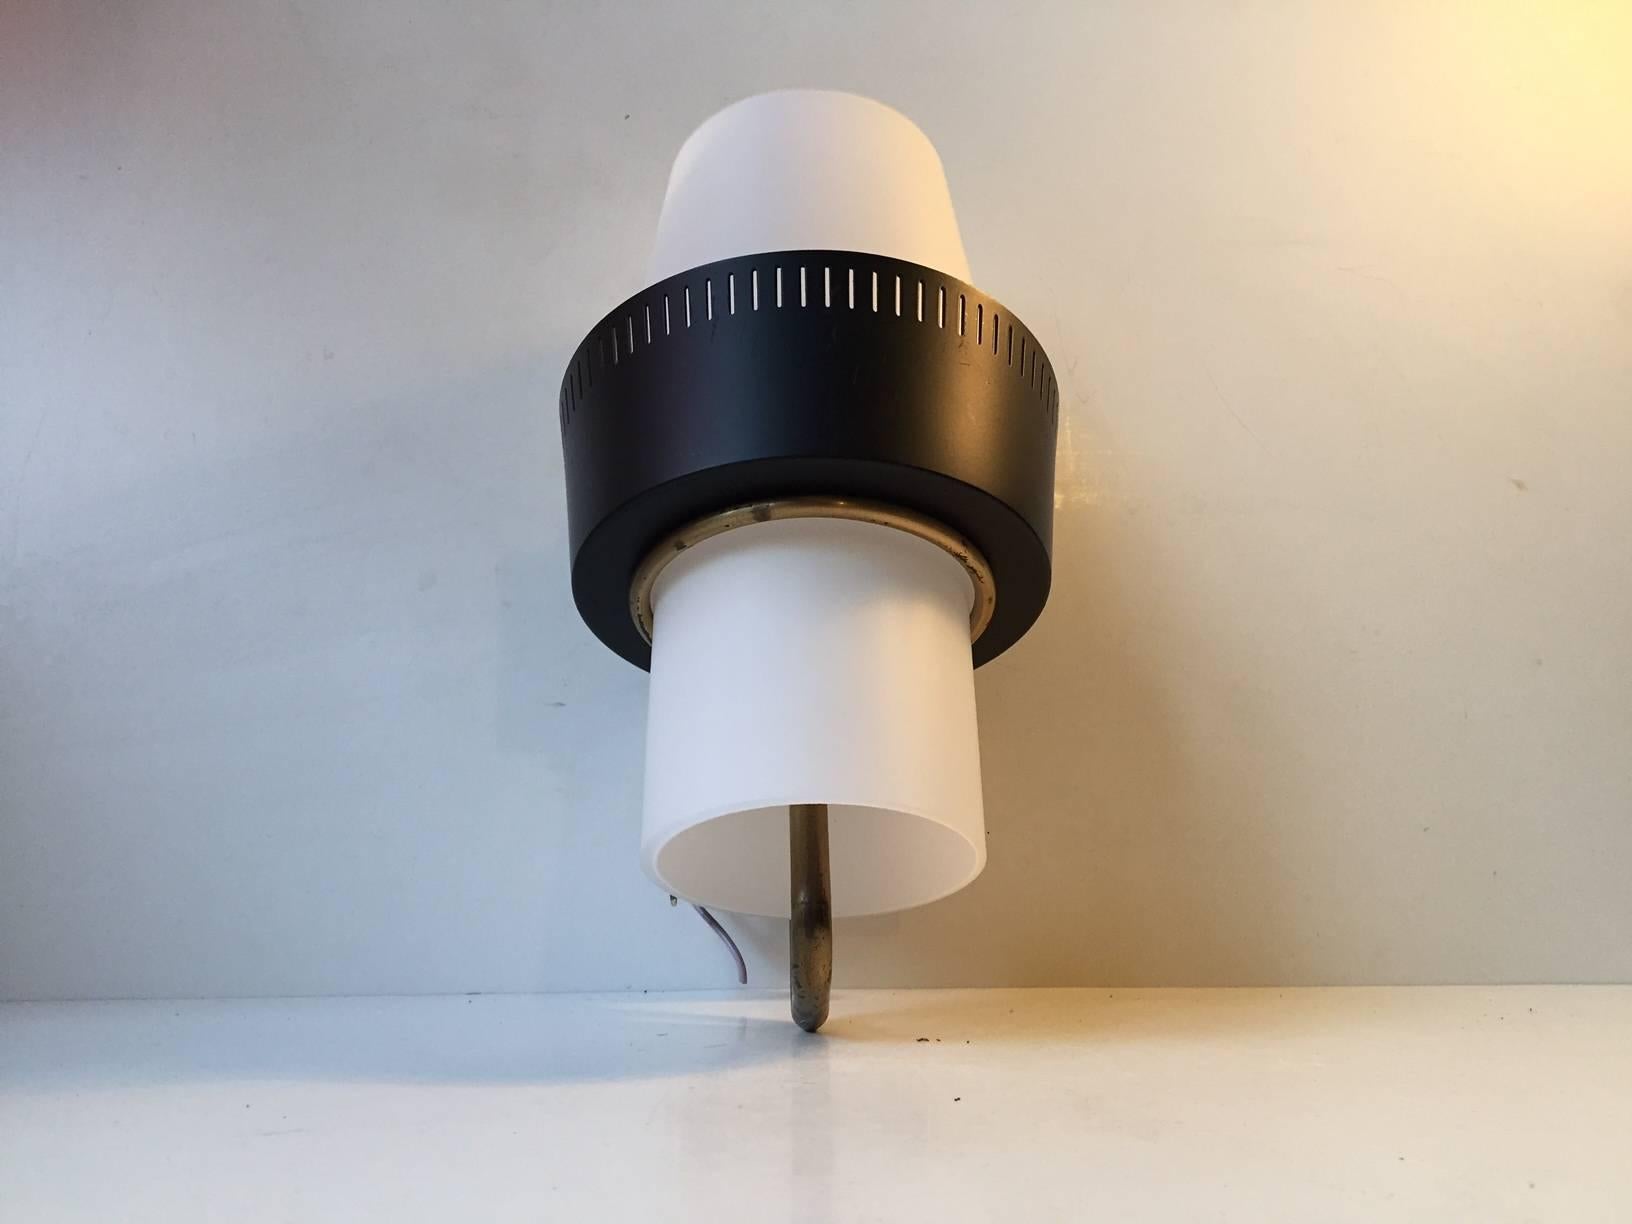 Reminiscent in style and overall quality of Italian manufacturer Stilnovo, this wall light was designed by Bent Karlby and manufactured by Lyfa in Denmark during the 1950s. It is in very good vintage condition with no damage to the white cased